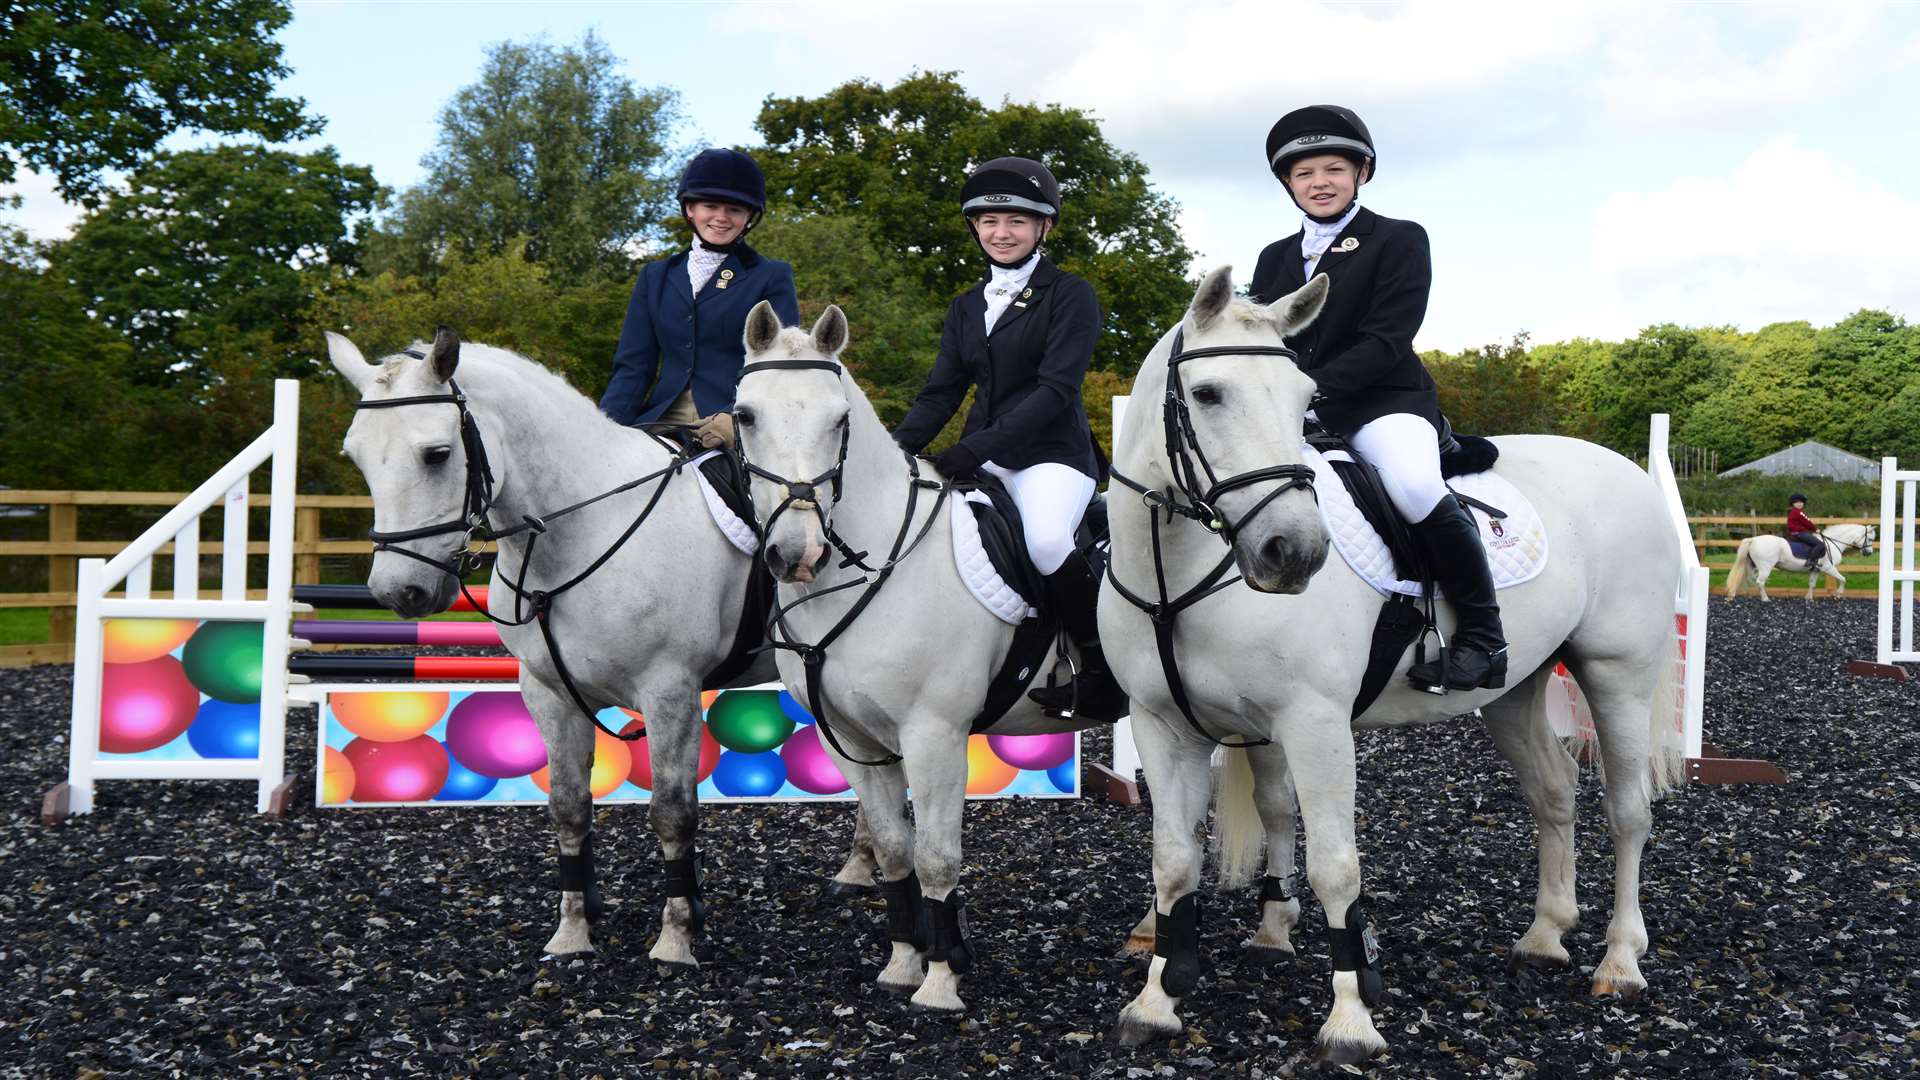 A new riding arena at the Kent College Farm opened with the support of the Friends of Kent College.